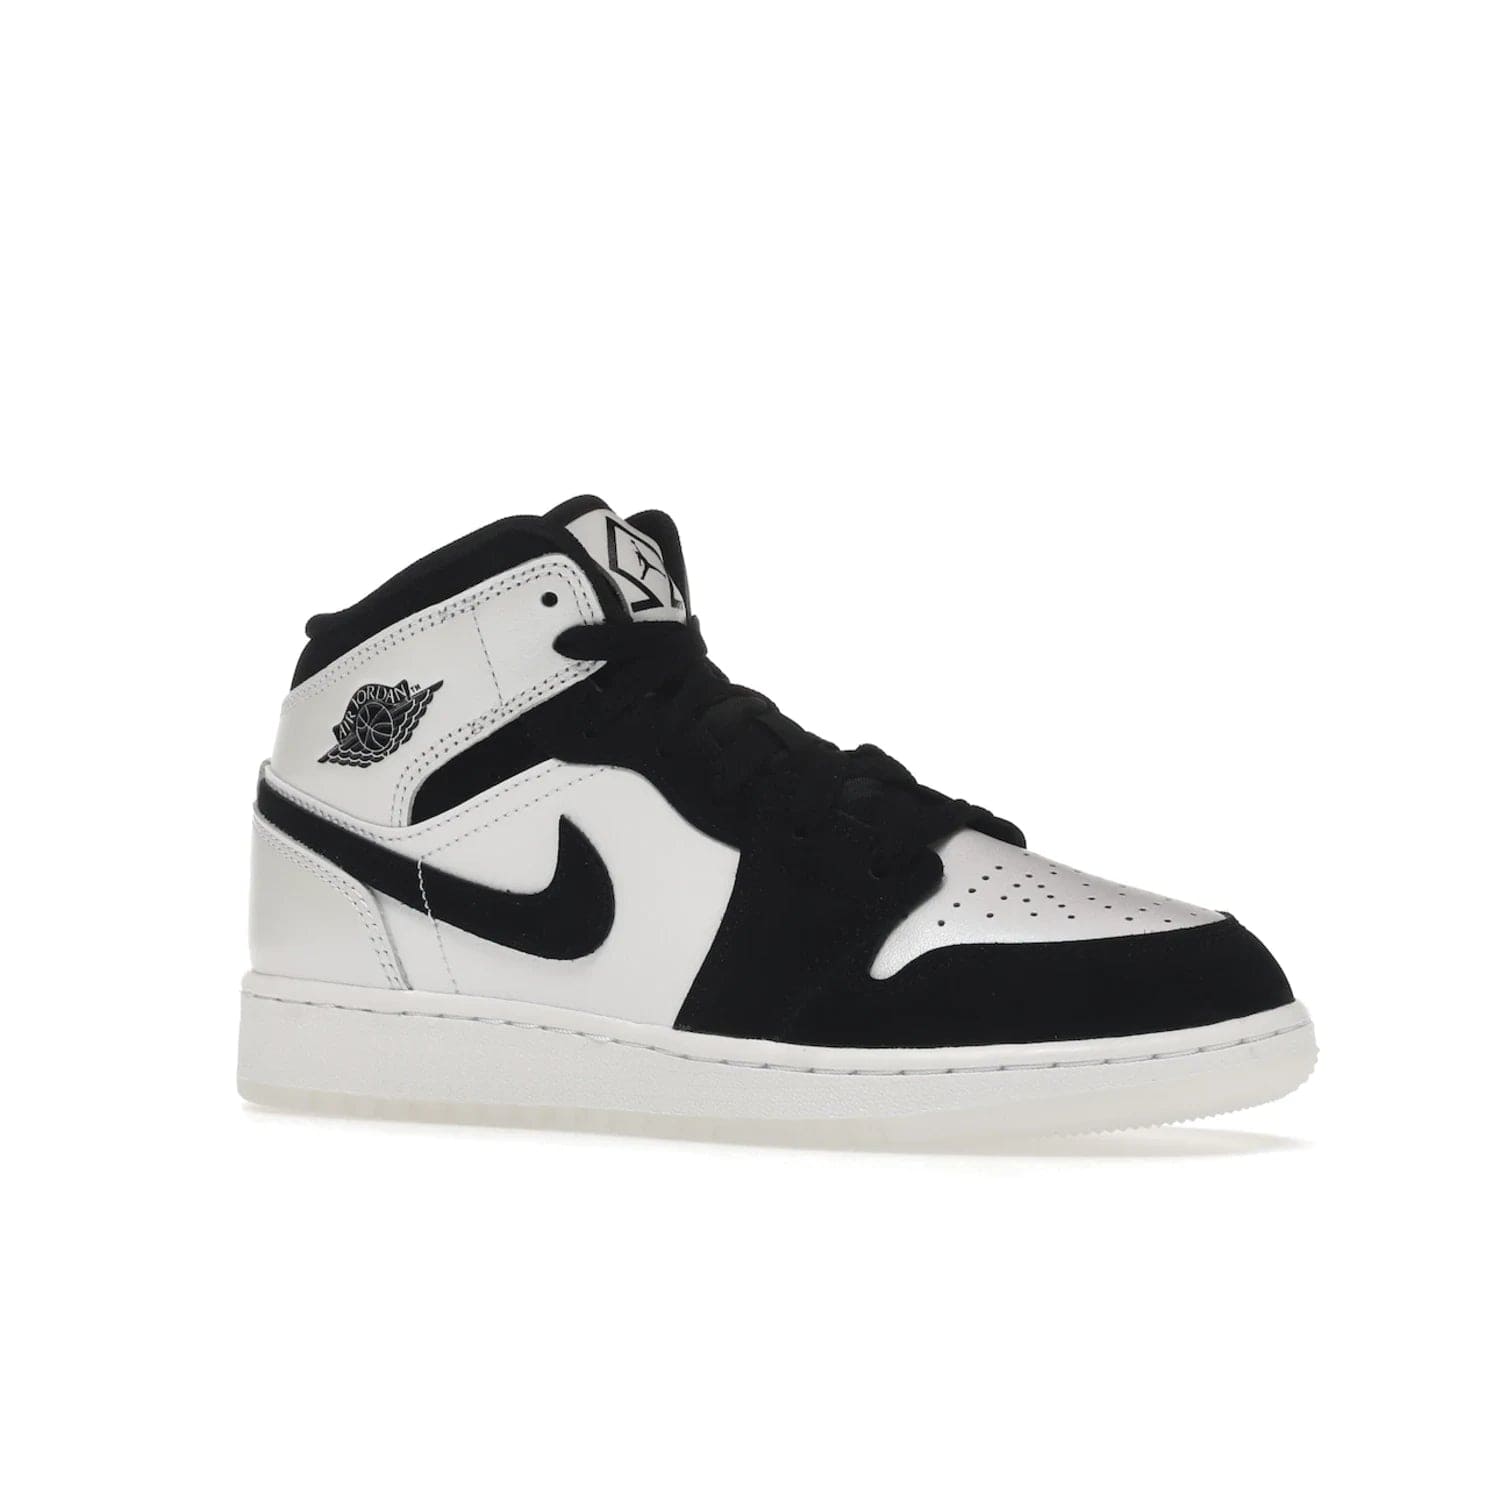 Jordan 1 Mid Diamond Shorts (GS) - Image 4 - Only at www.BallersClubKickz.com - Get the Jordan 1 Mid Diamond Shorts GS on 9th Feb 2022! Features a white, black & suede design with nylon tongue, stamped wings logo, rubber midsole & outsole. Only $100!